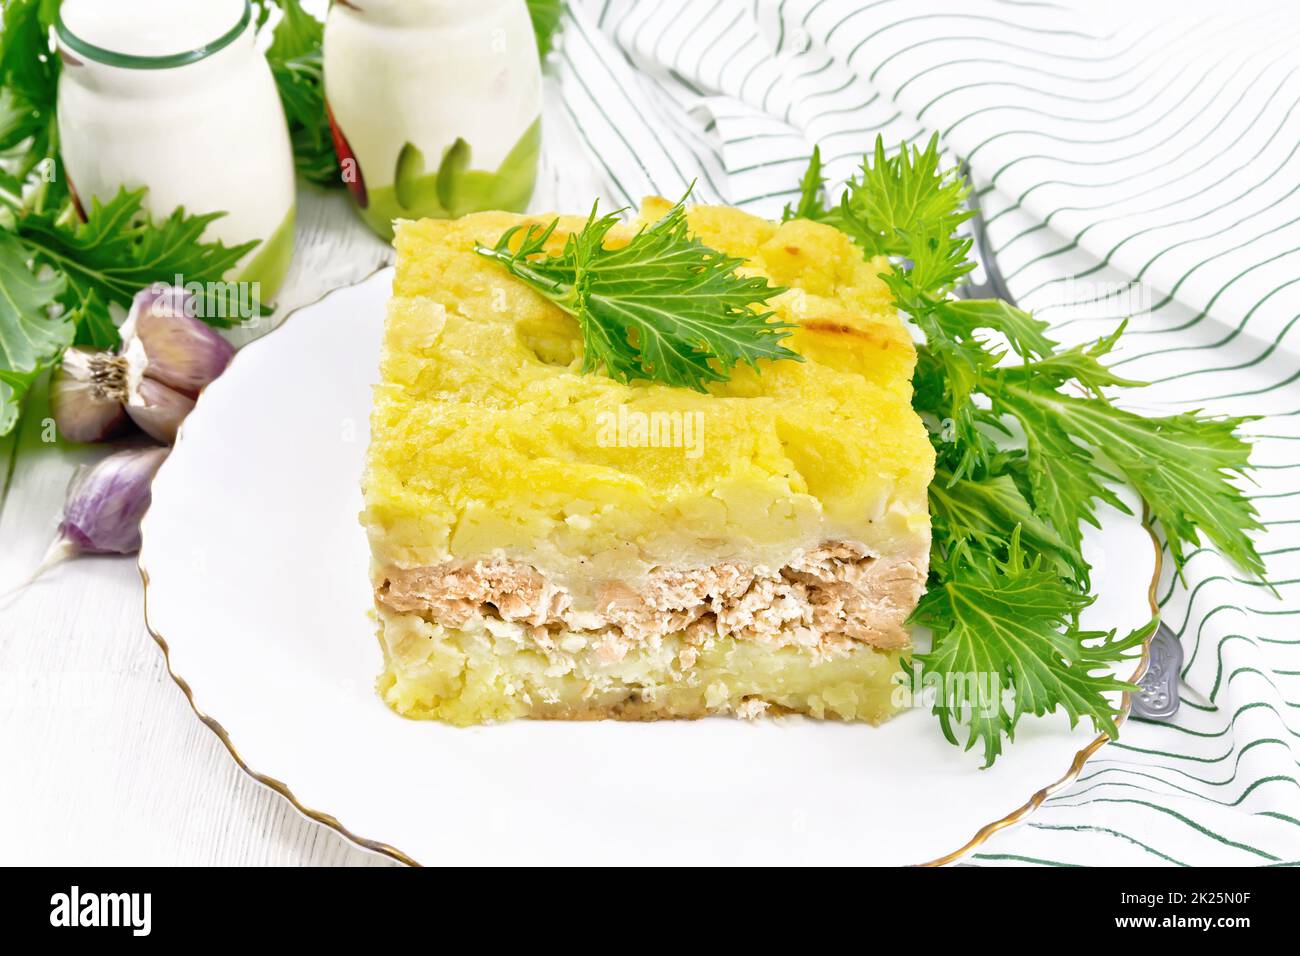 Casserole with potatoes and fish in plate on board Stock Photo